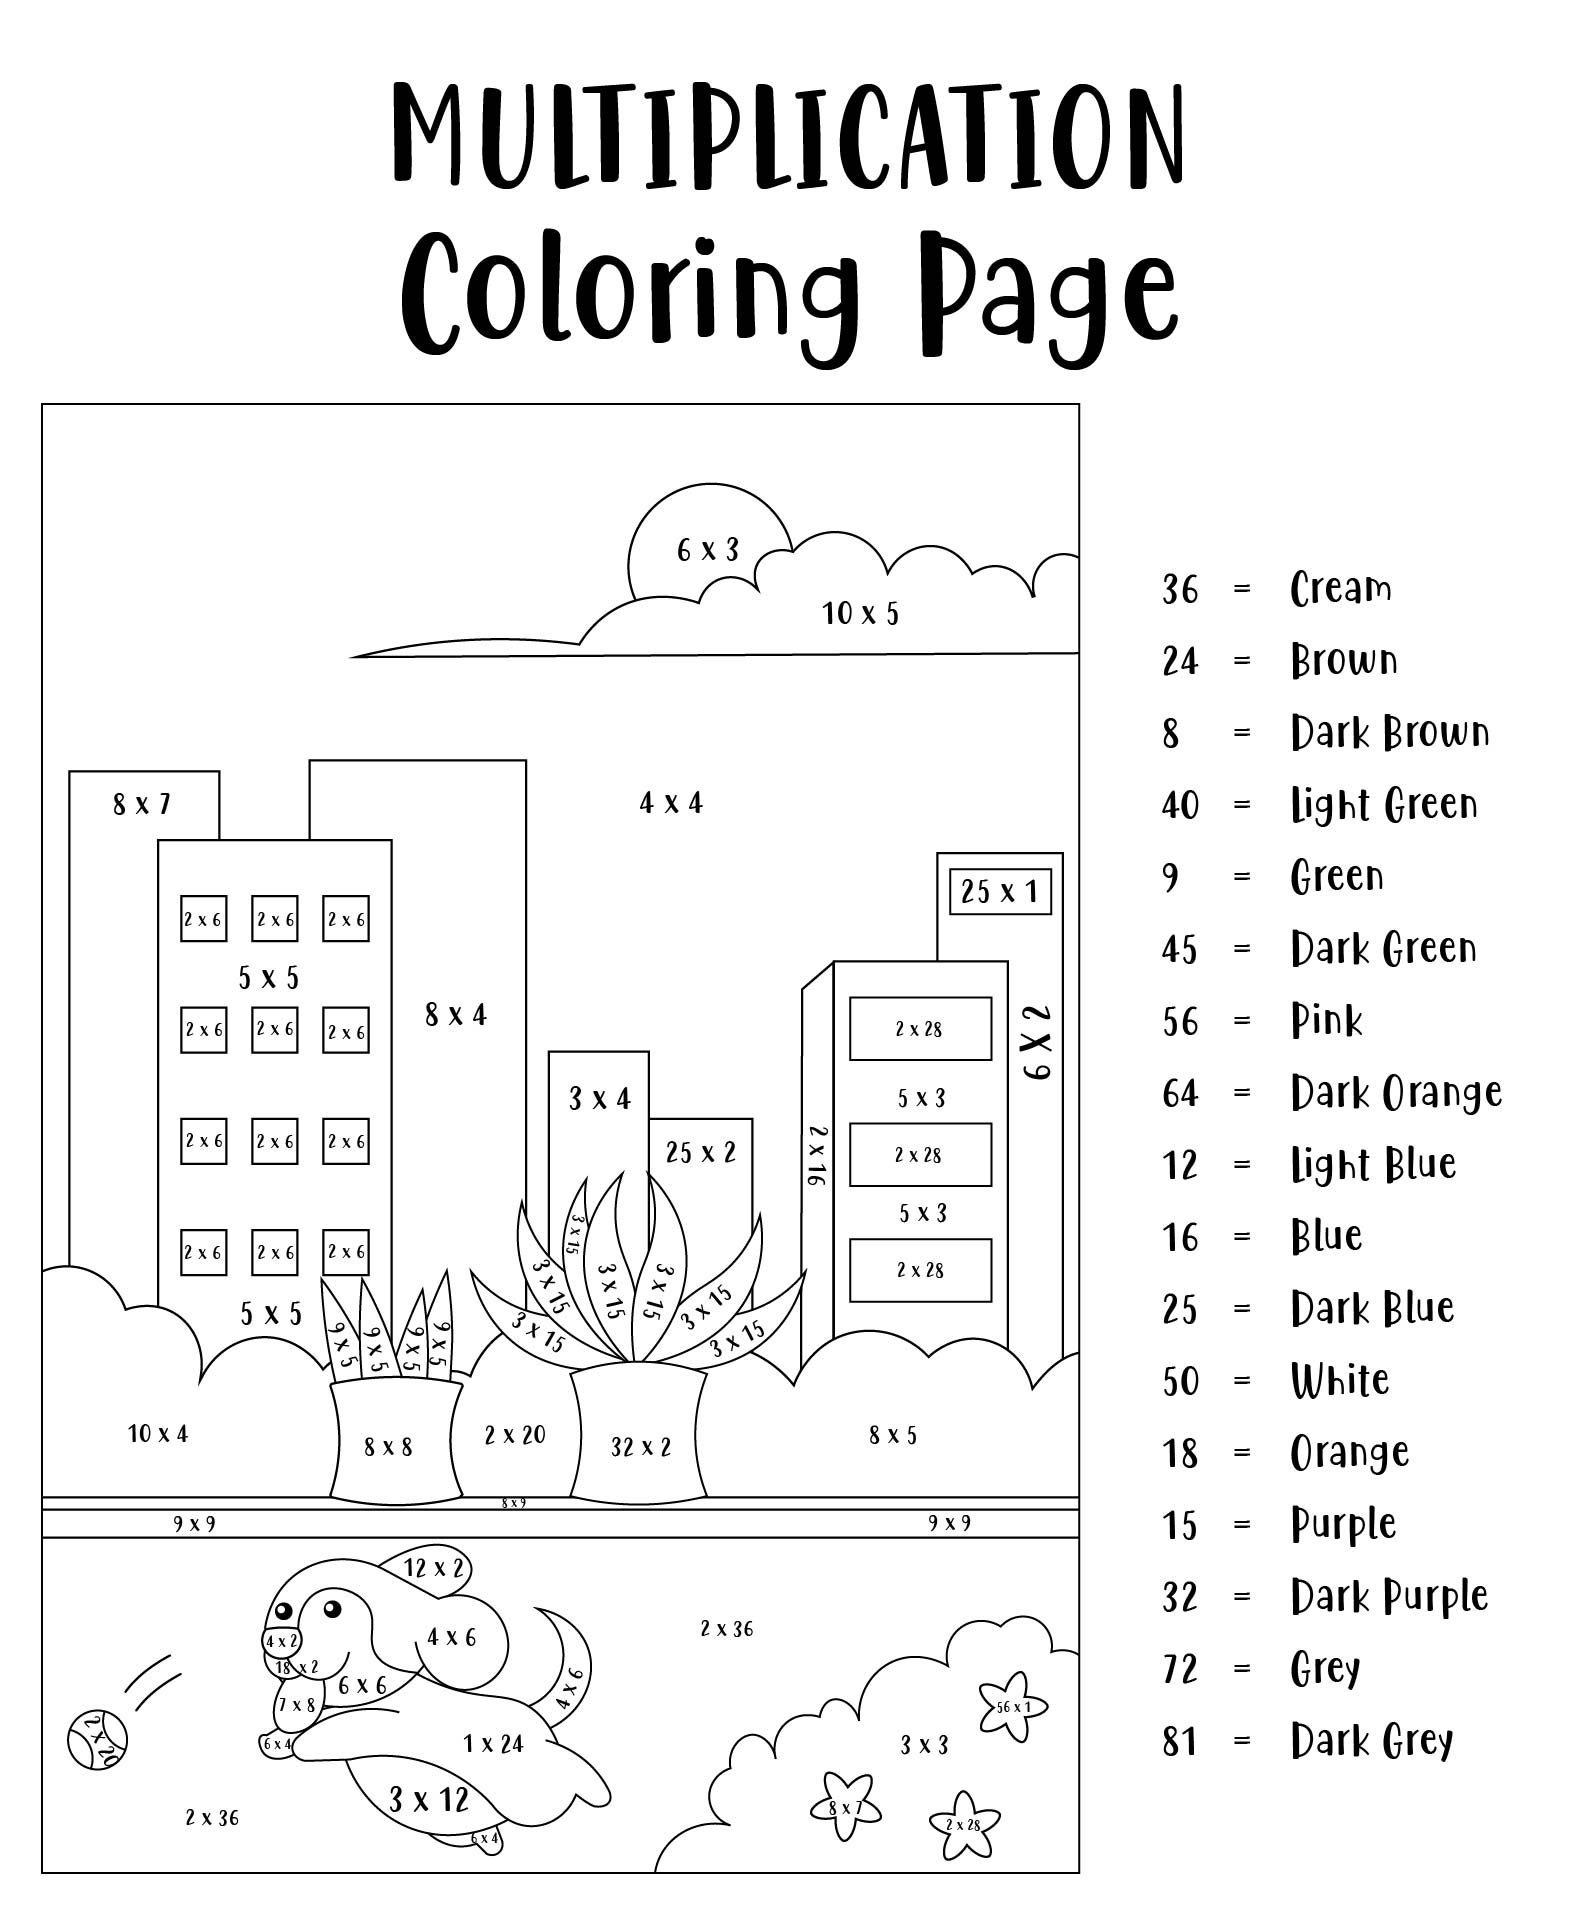 Multiplication Table Coloring Pages